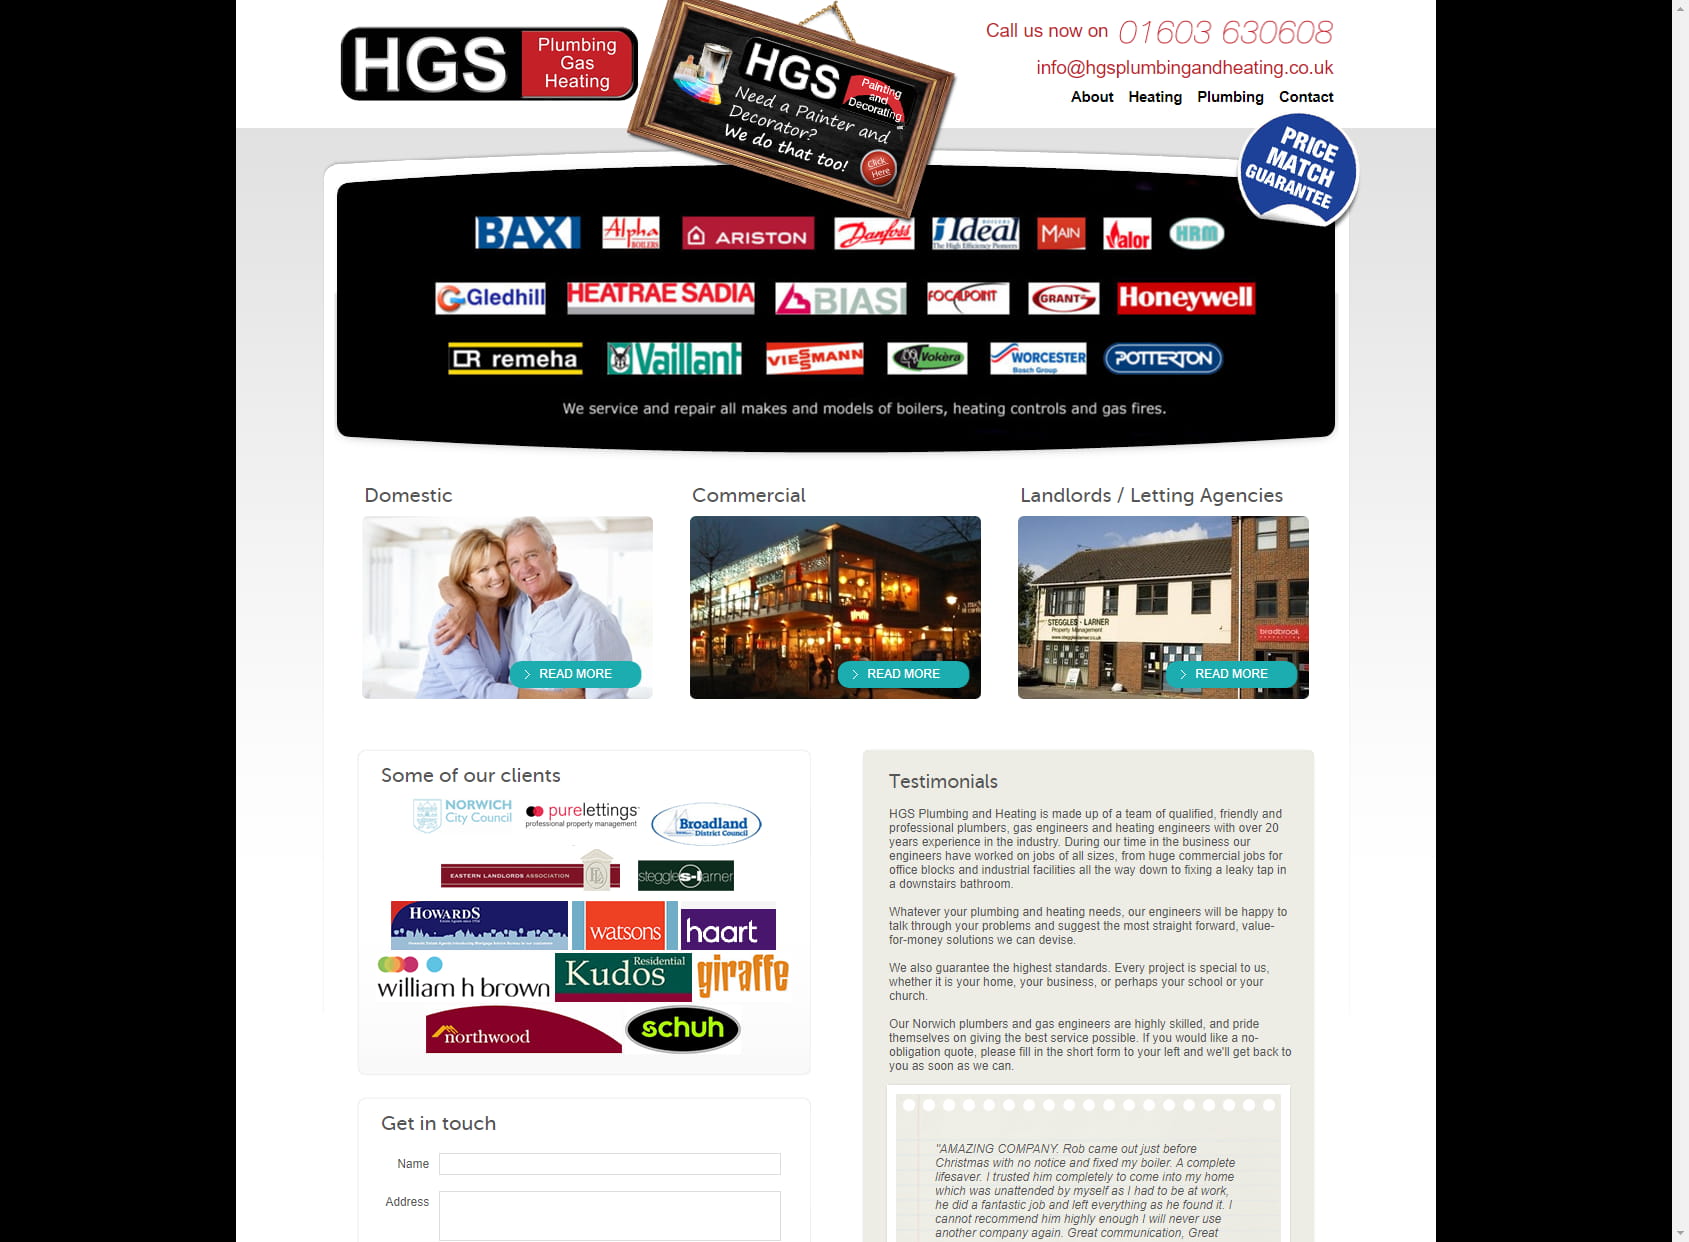 HGS Plumbing and Heating